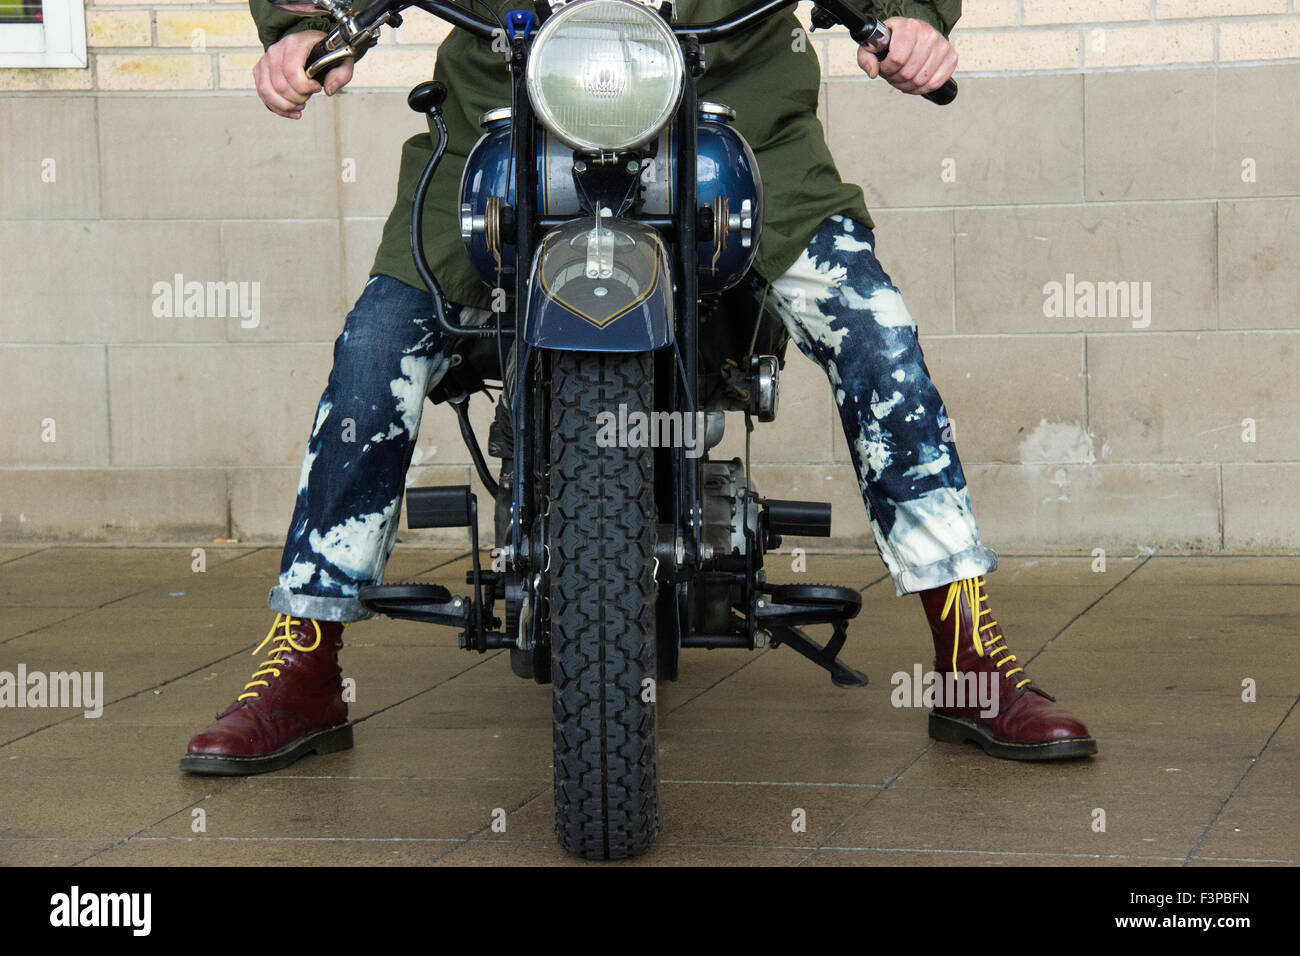 Scooter rider takes on a big bike Stock Photo - Alamy